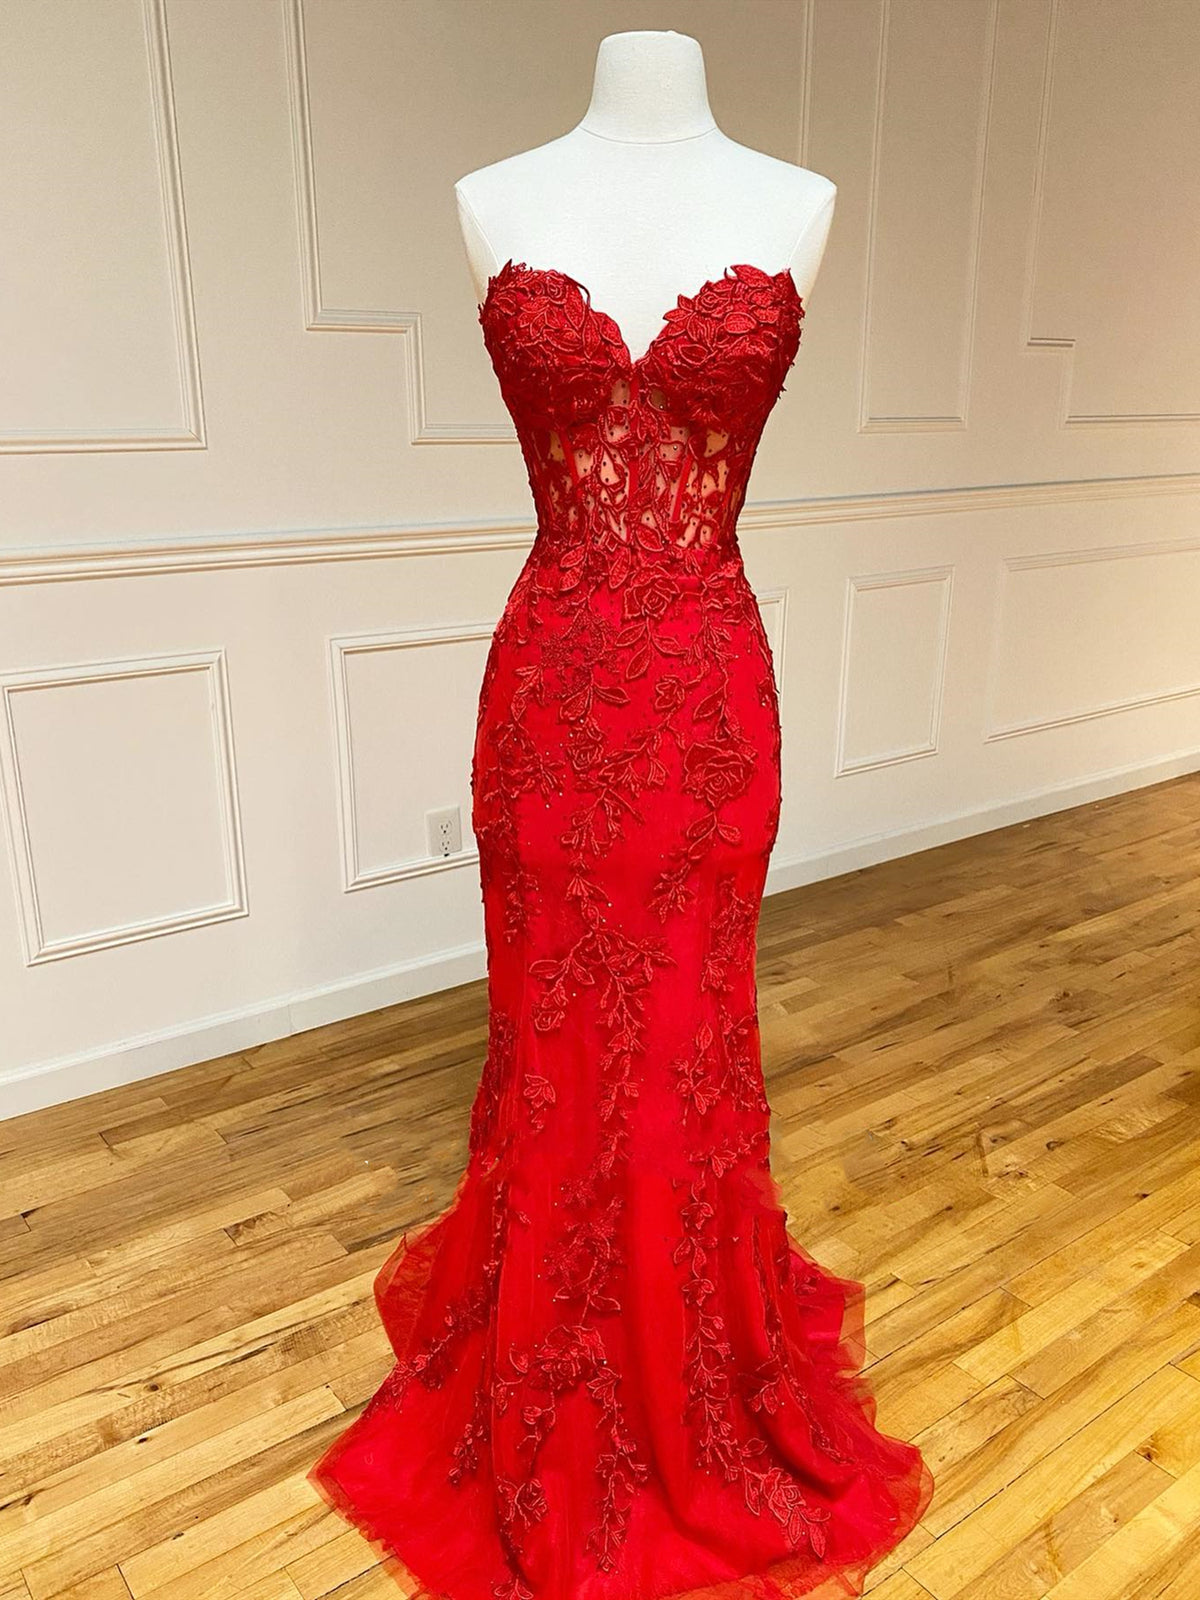 Summer Wedding, Strapless Red Lace Mermaid Long Prom Dresses, Red Mermaid Long Lace Formal Evening Dresses